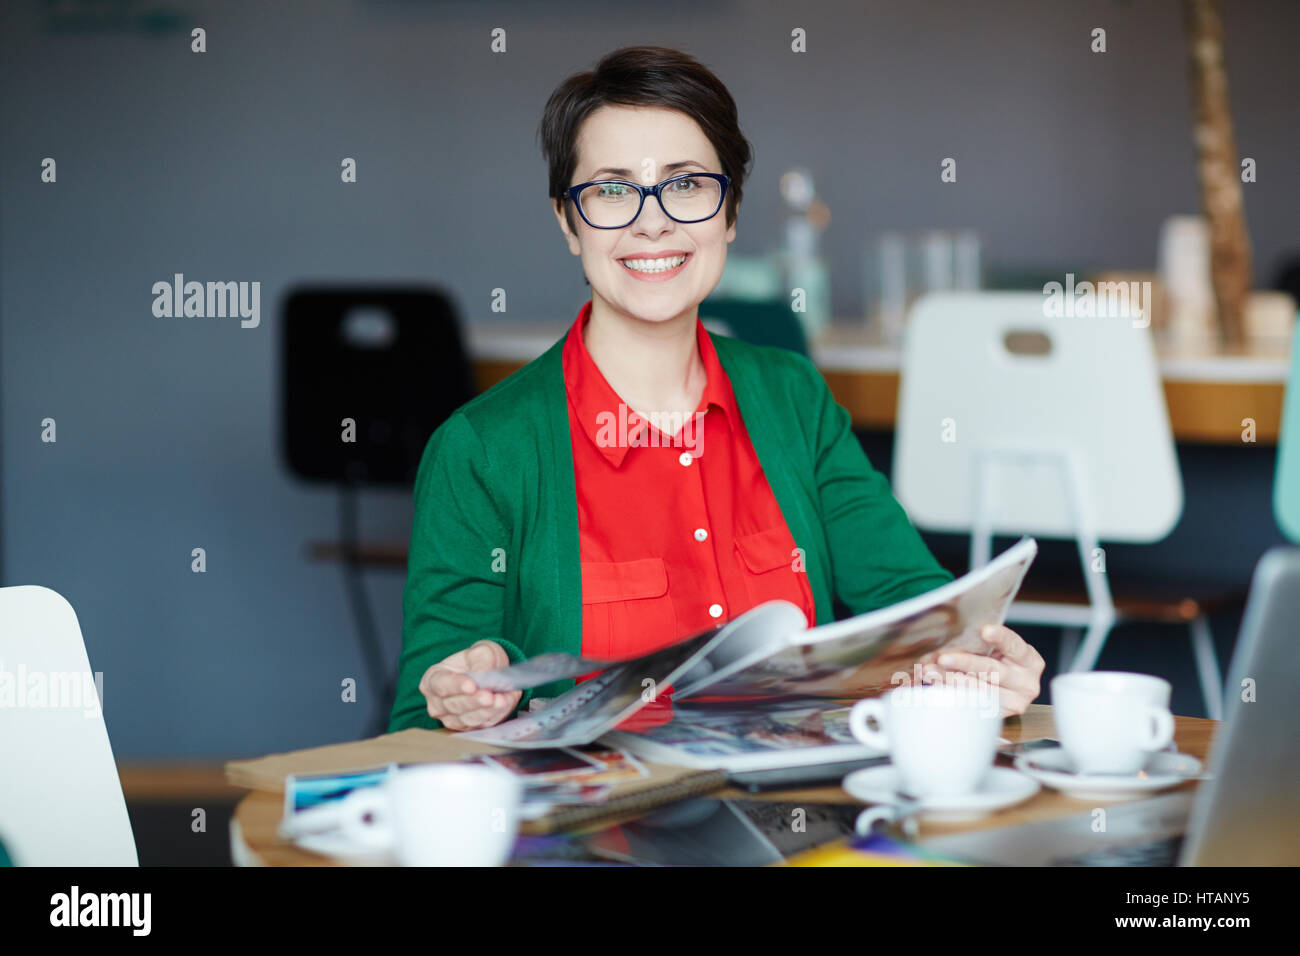 Portrait of young successful businesswoman wearing colorful casual clothes smiling cheerfully at camera while reading magazines at table Stock Photo